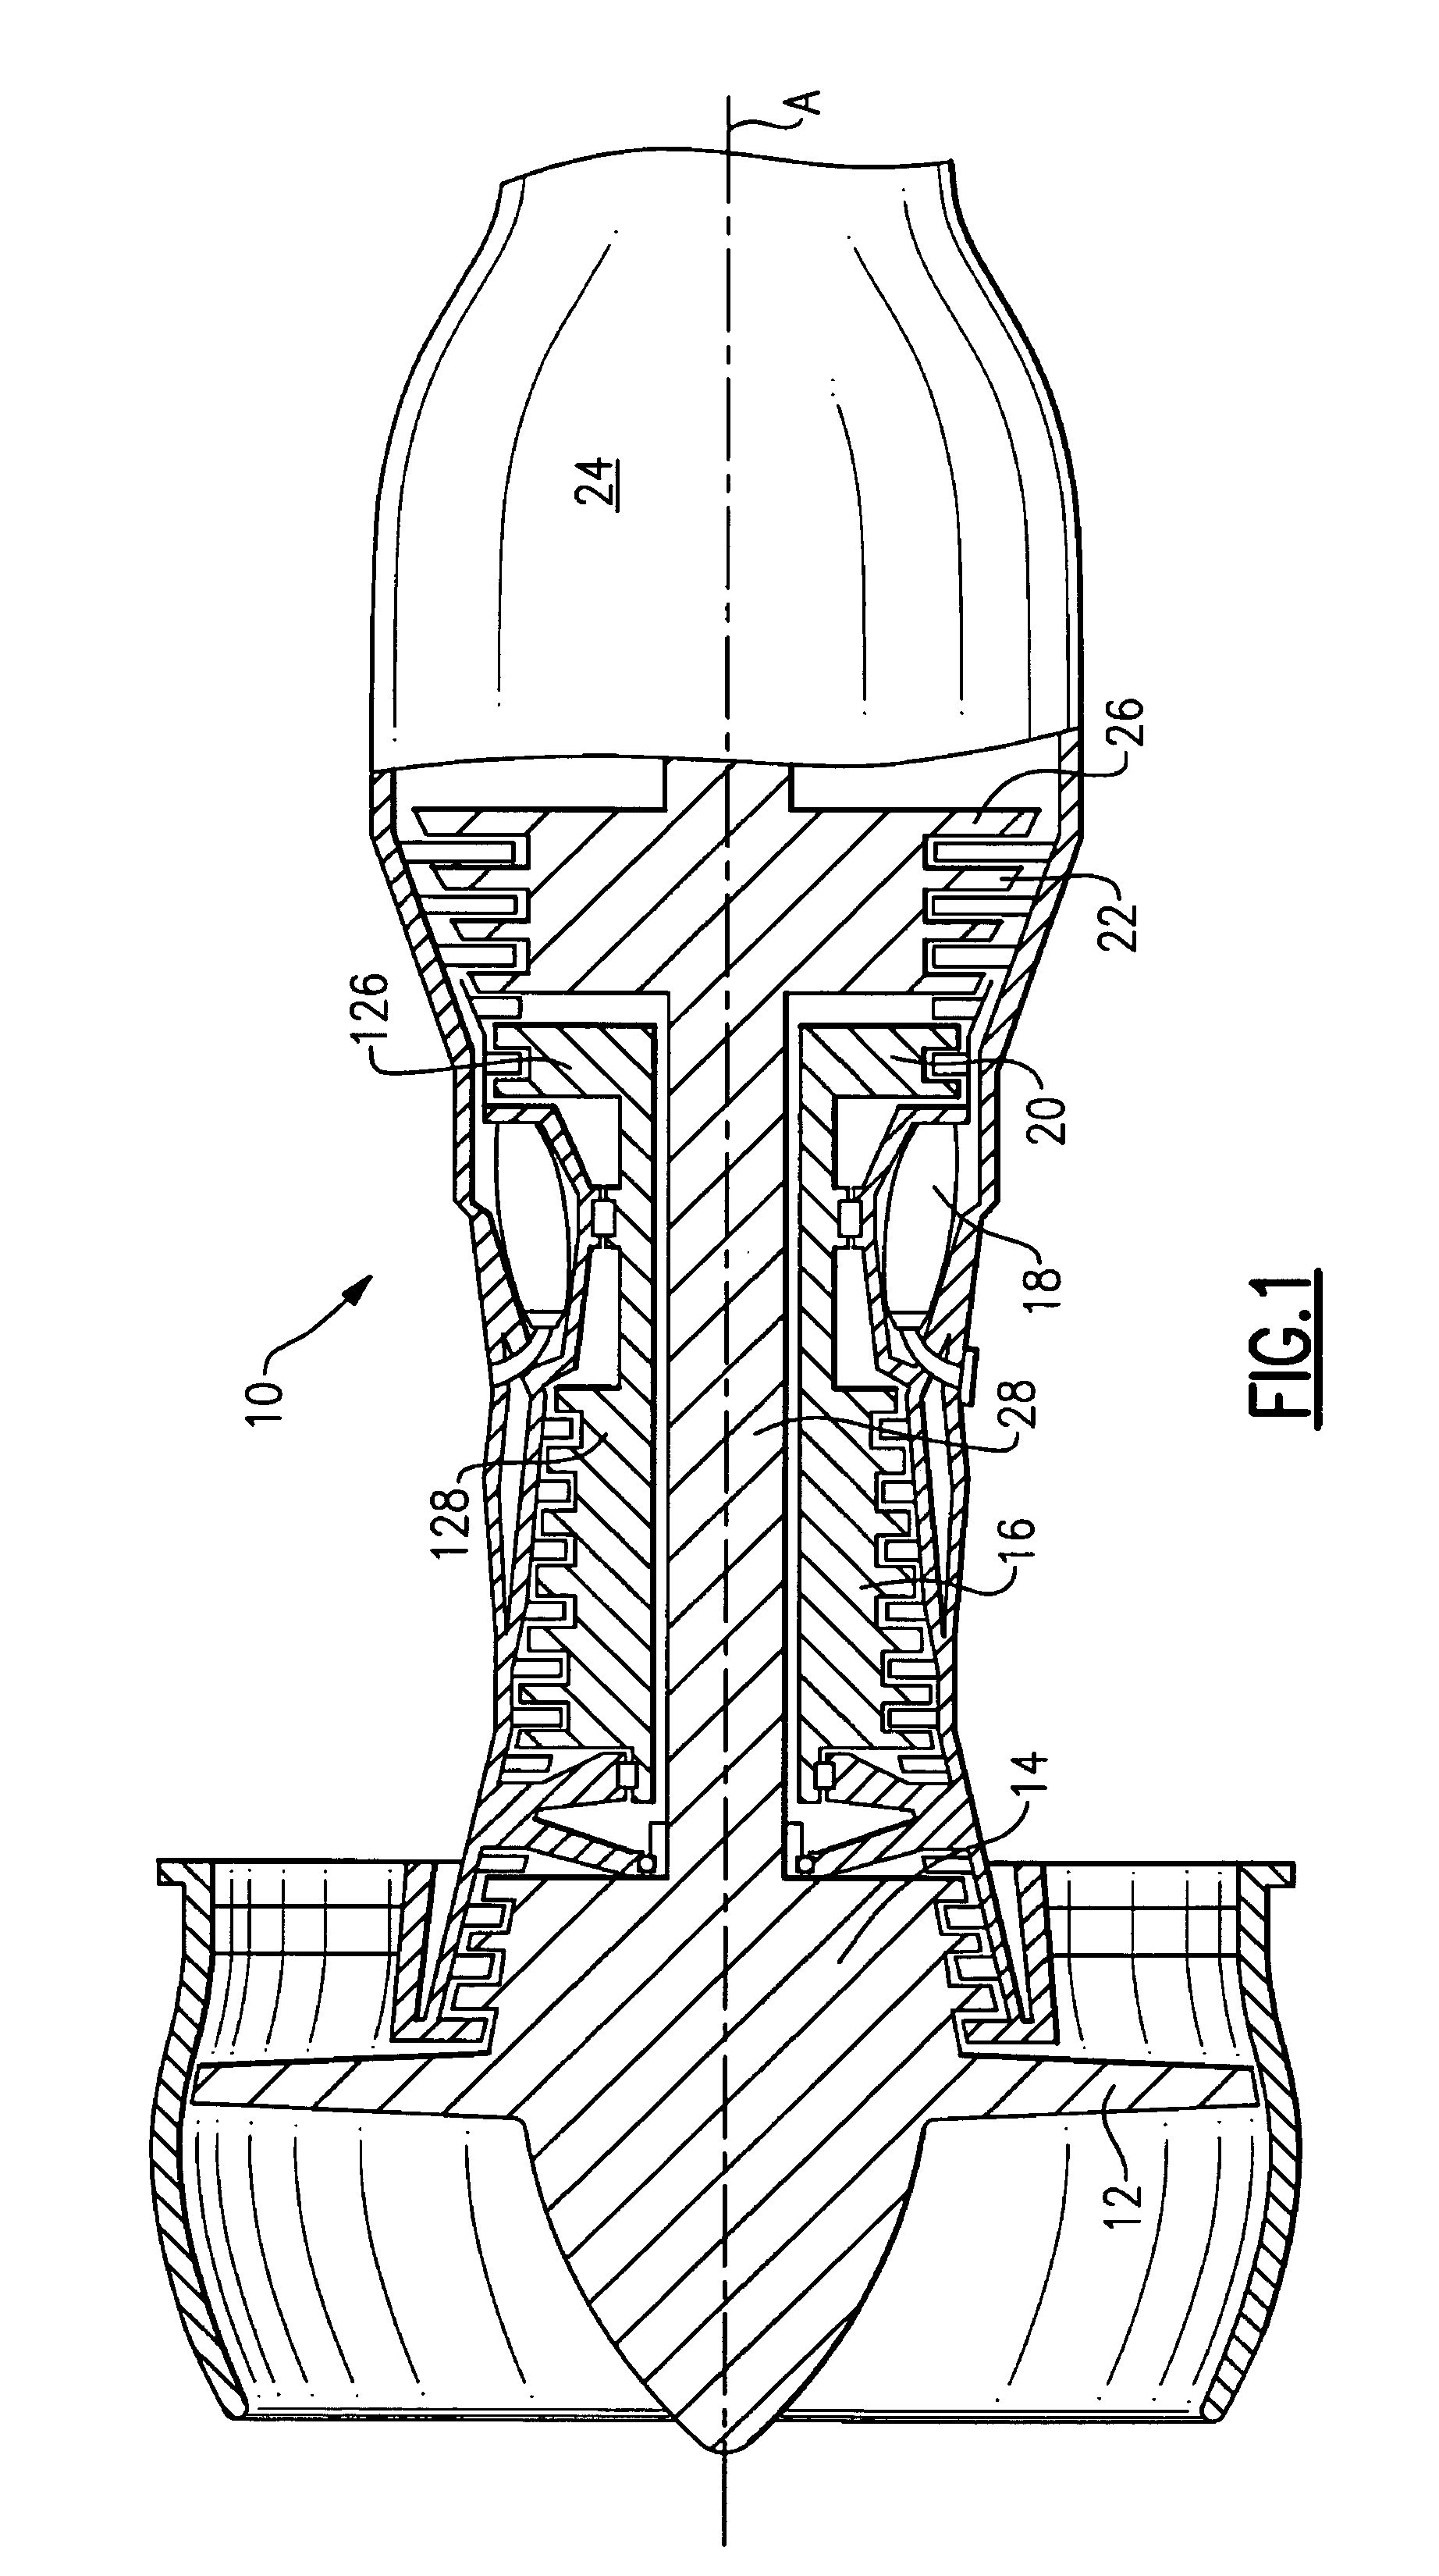 Radially energized oil capture device for a geared turbofan